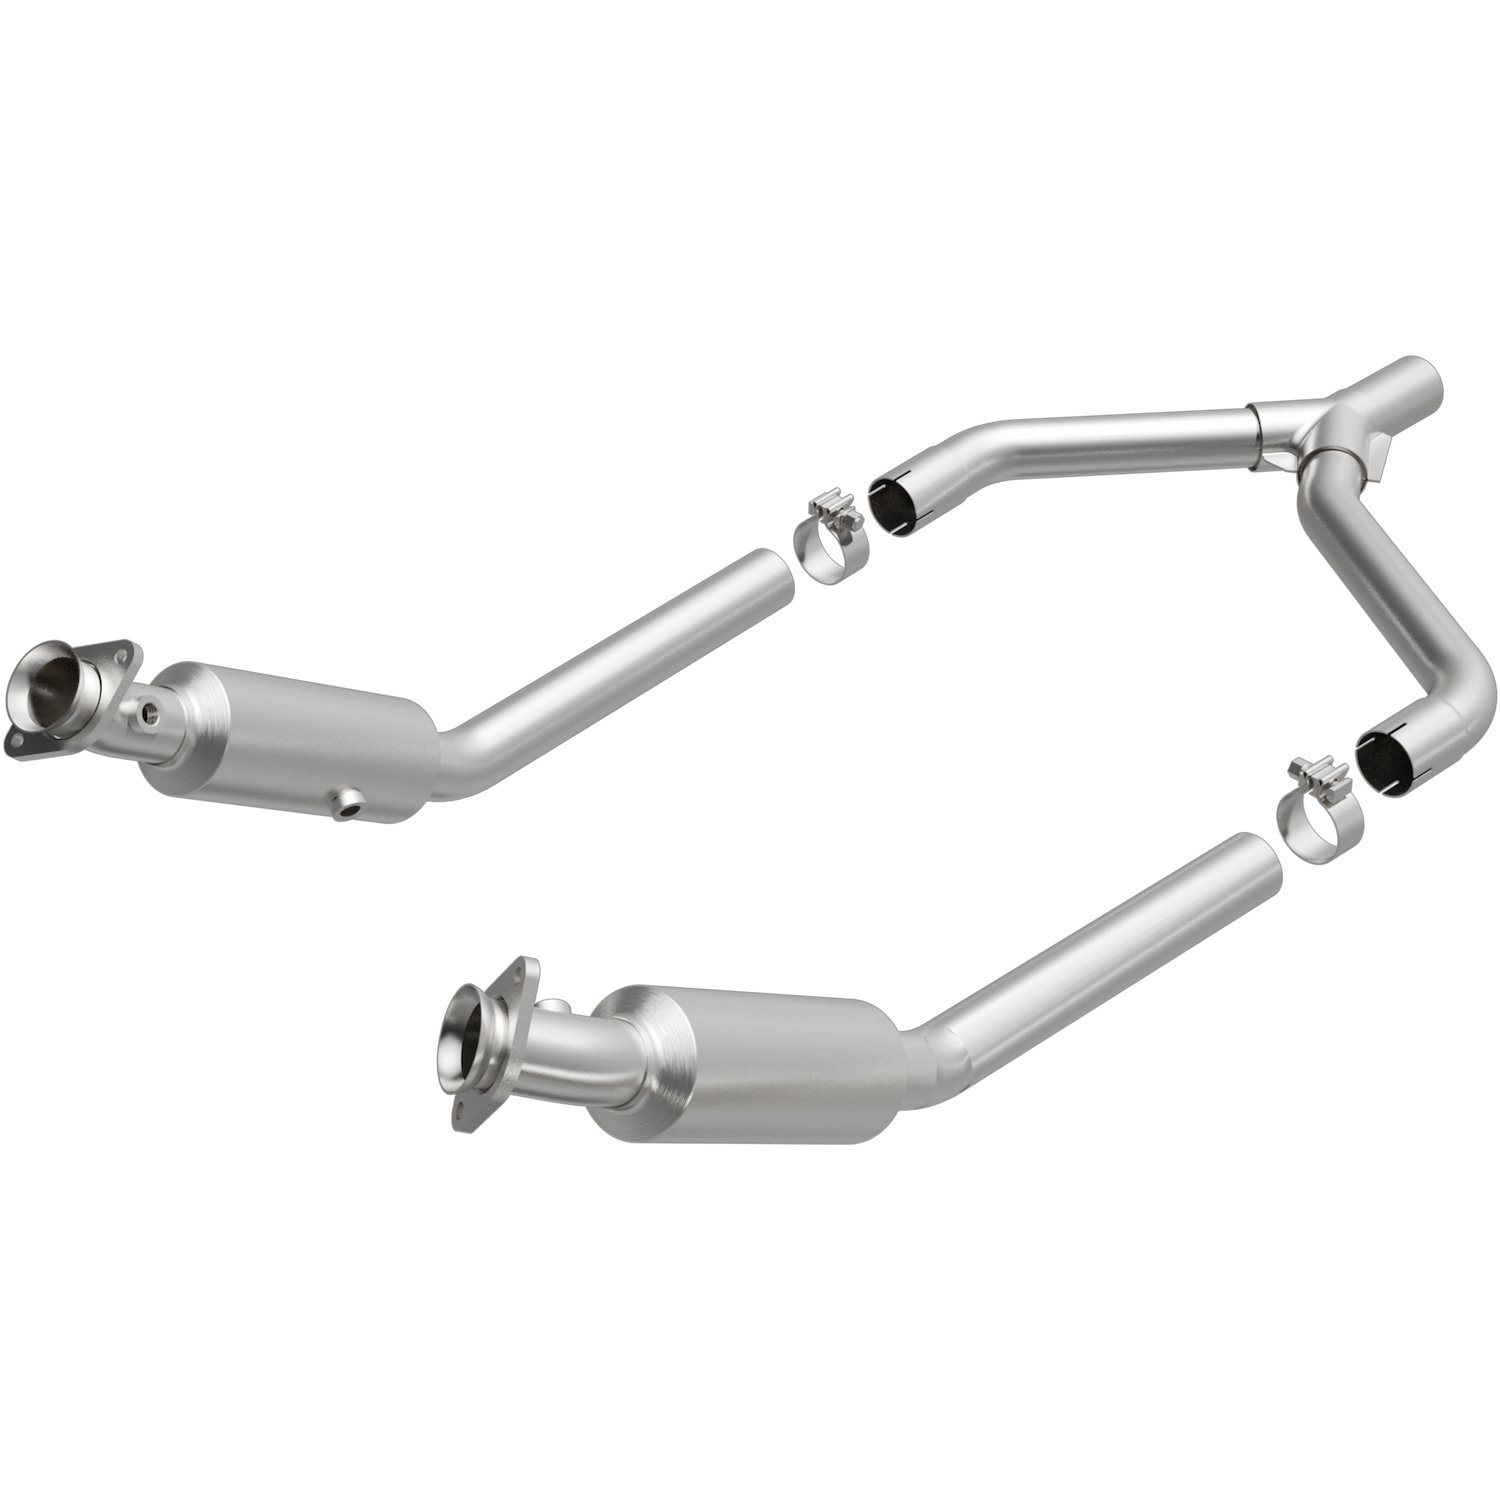 2006-2010 Ford Mustang California Grade CARB Compliant Direct-Fit Catalytic Converter